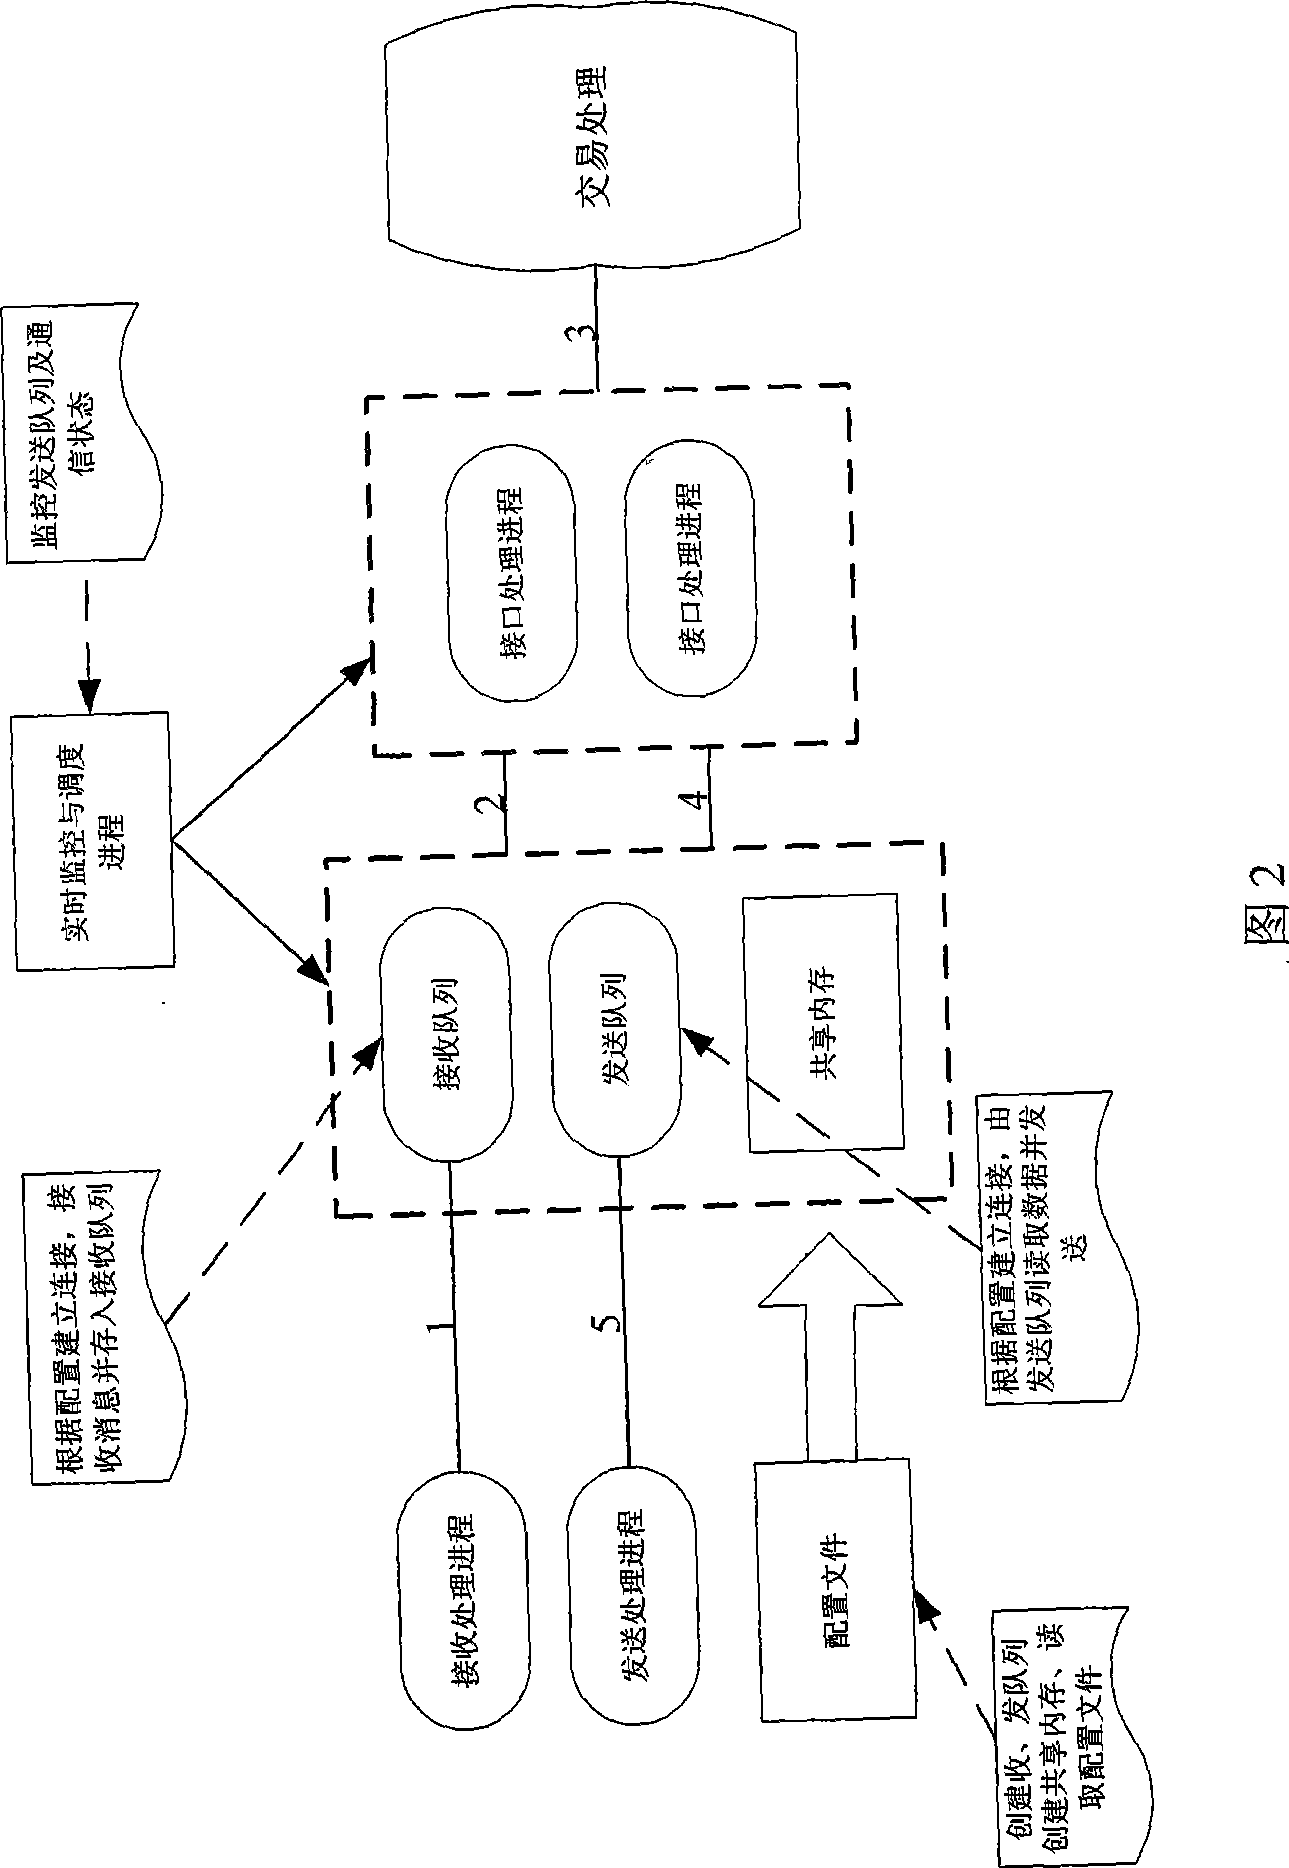 Gateway system for telecommunication stage payment and settlement